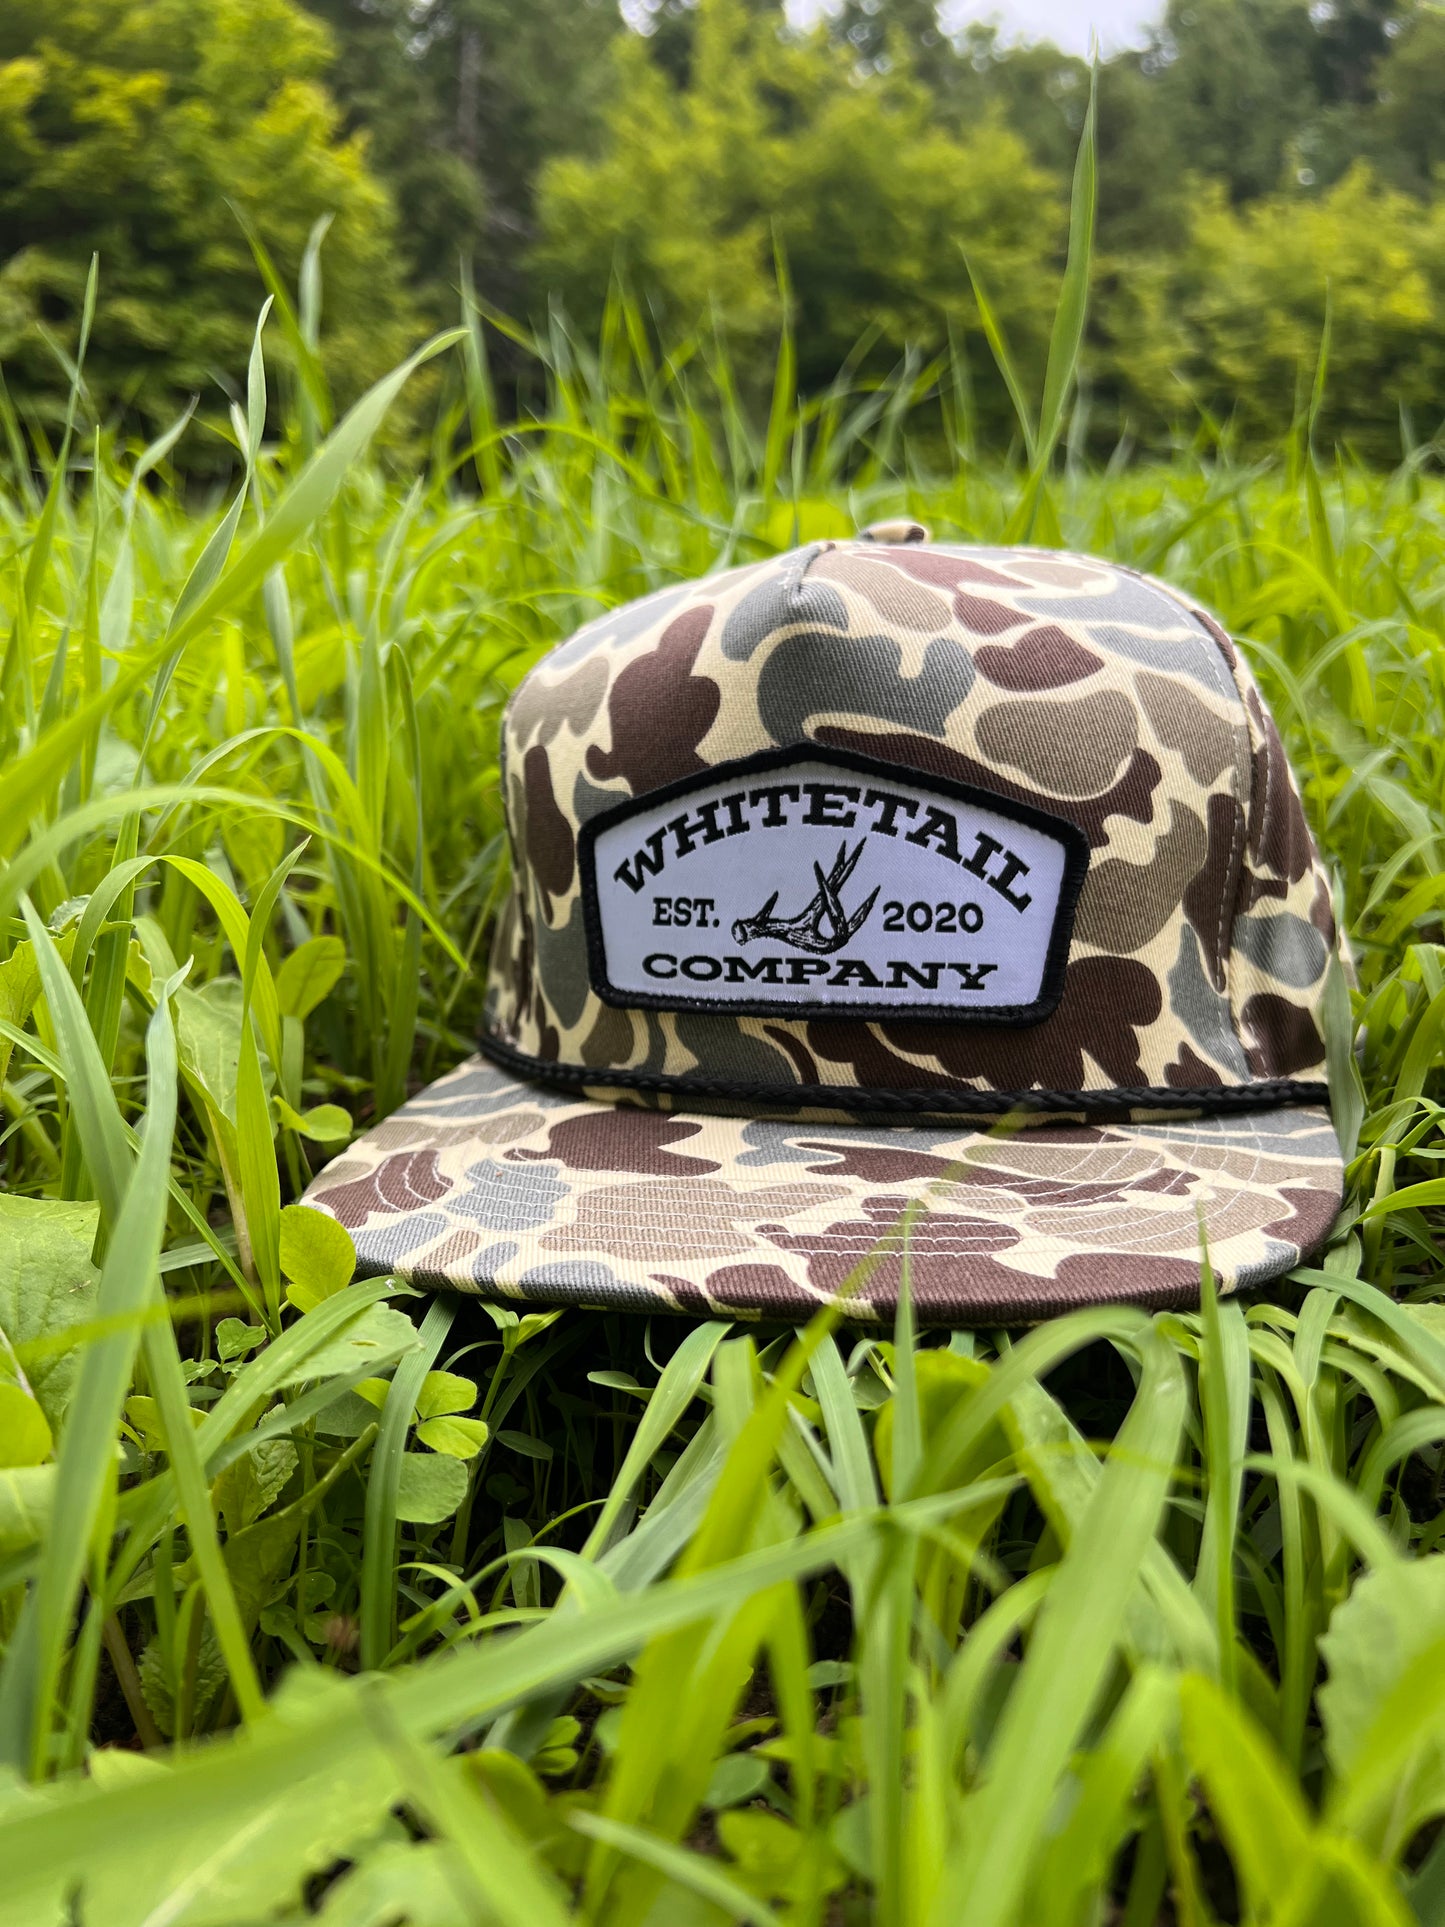 Whitetail Co. Duck Camo Trucker Shed Patch